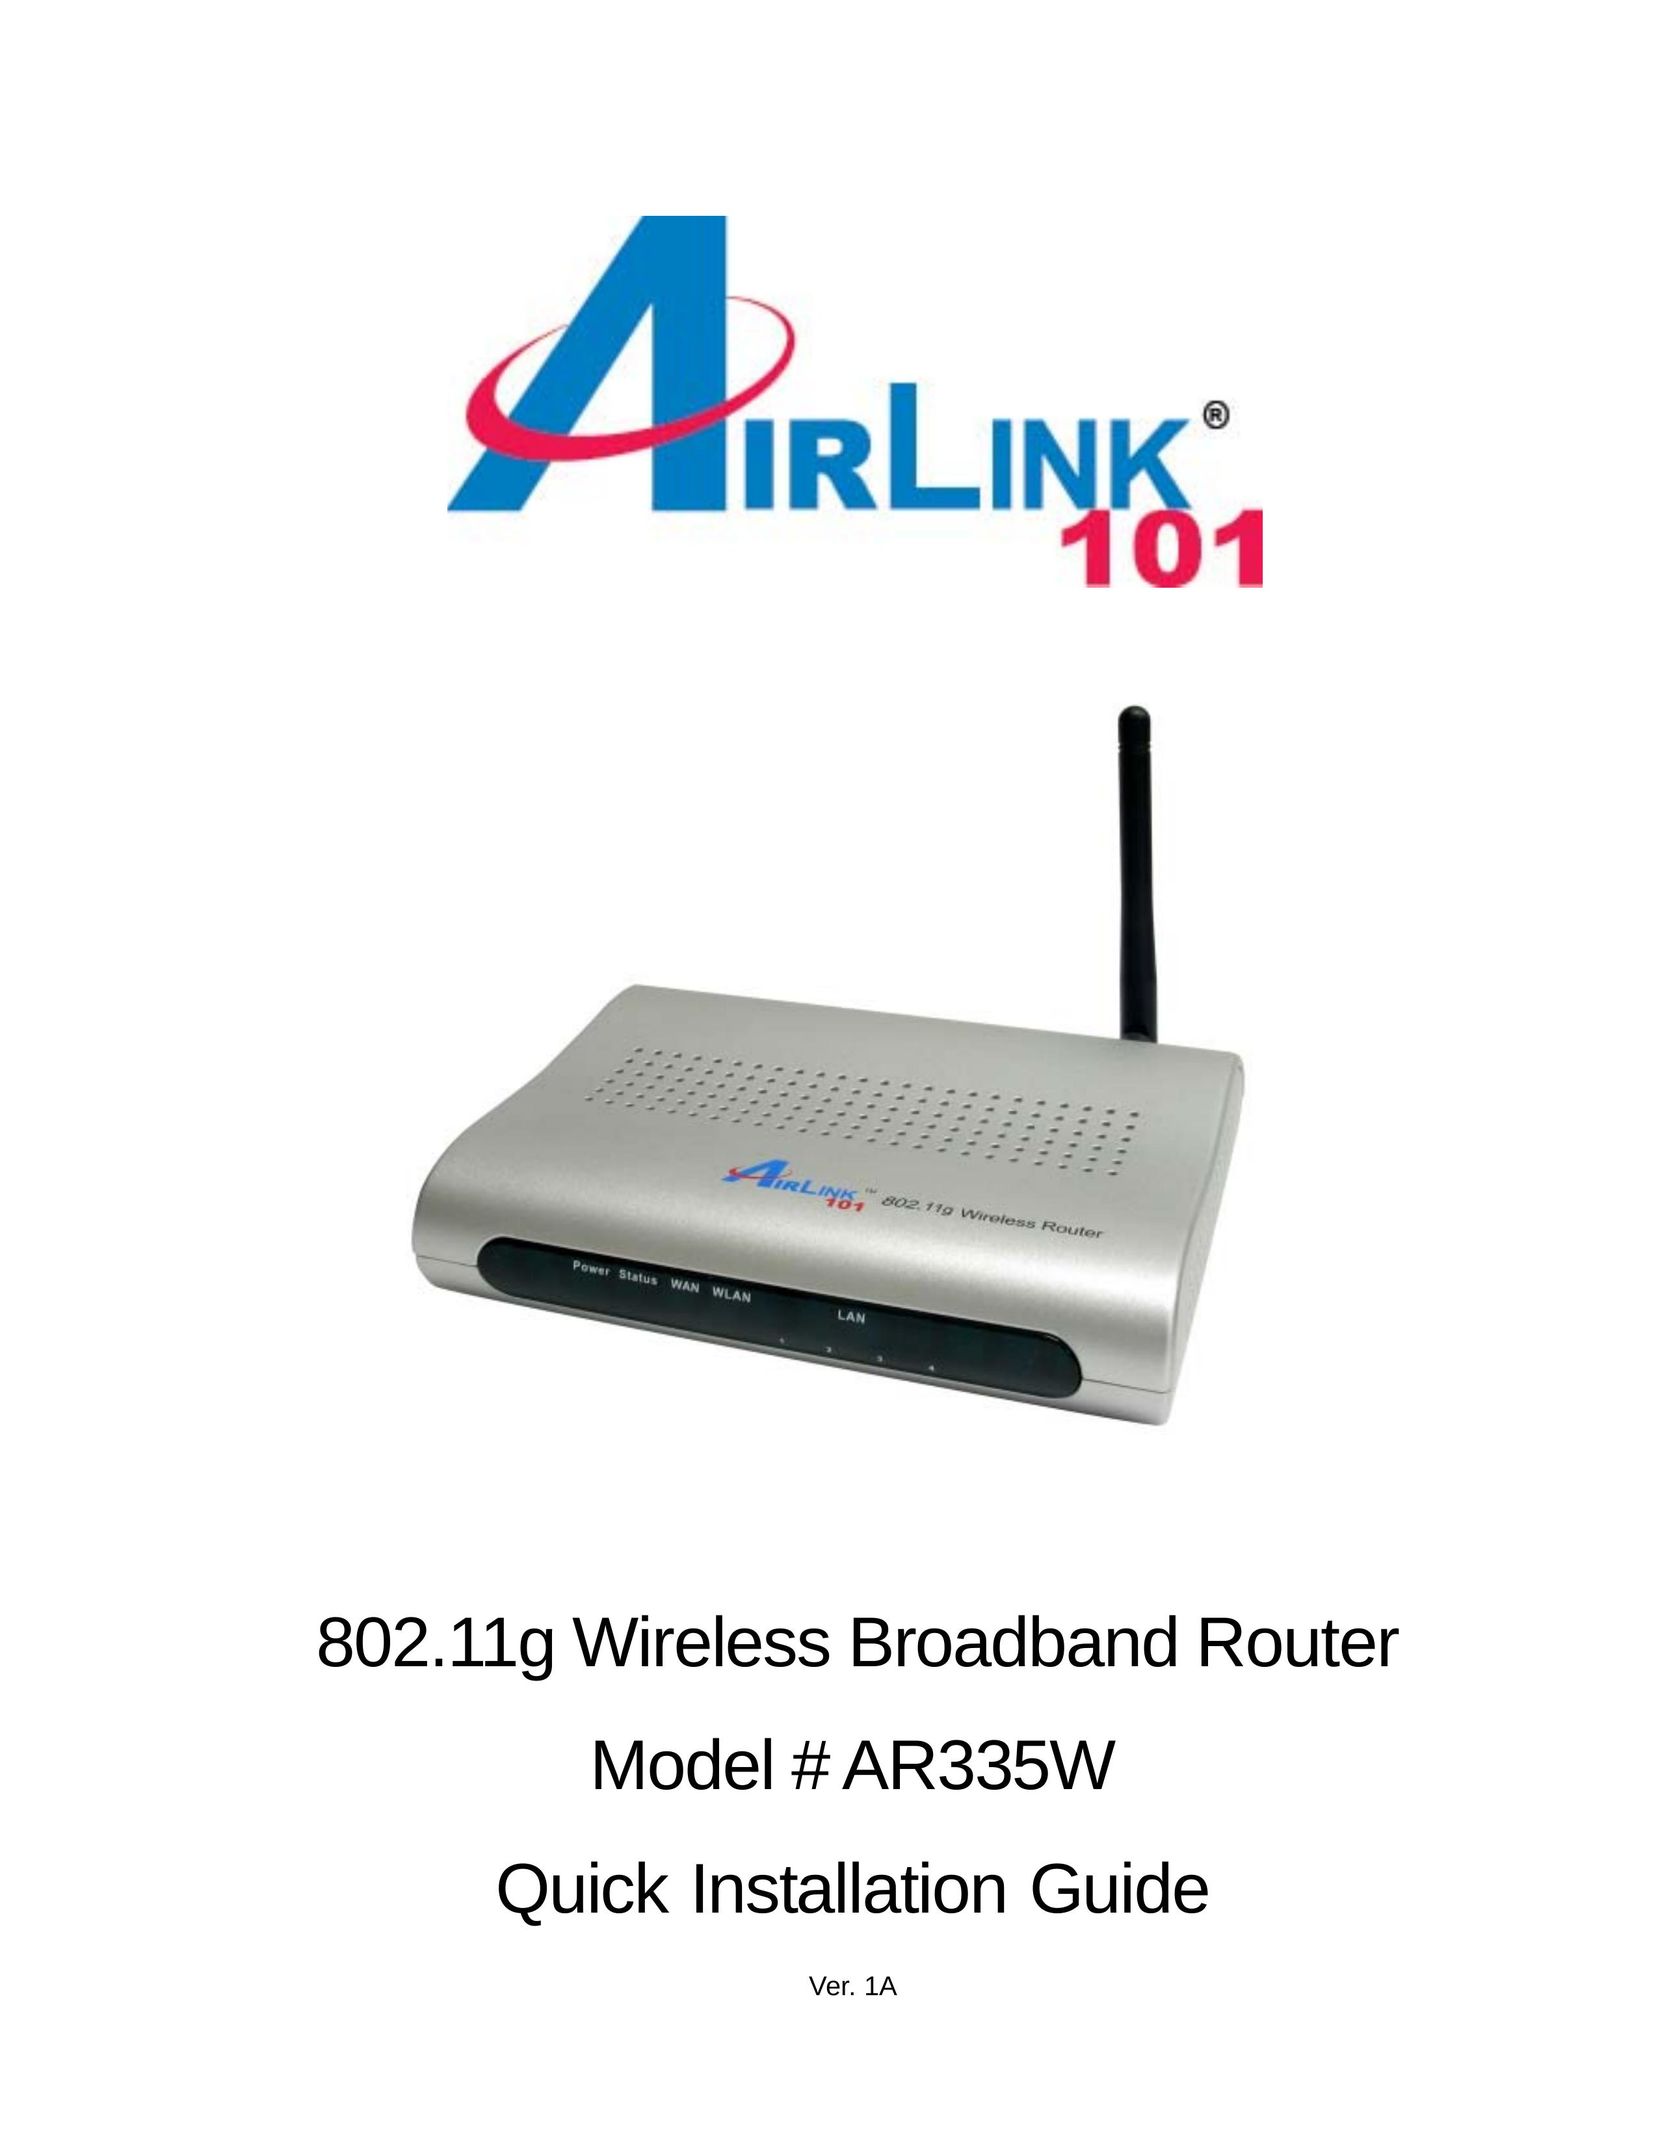 Airlink101 AR335W Network Router User Manual